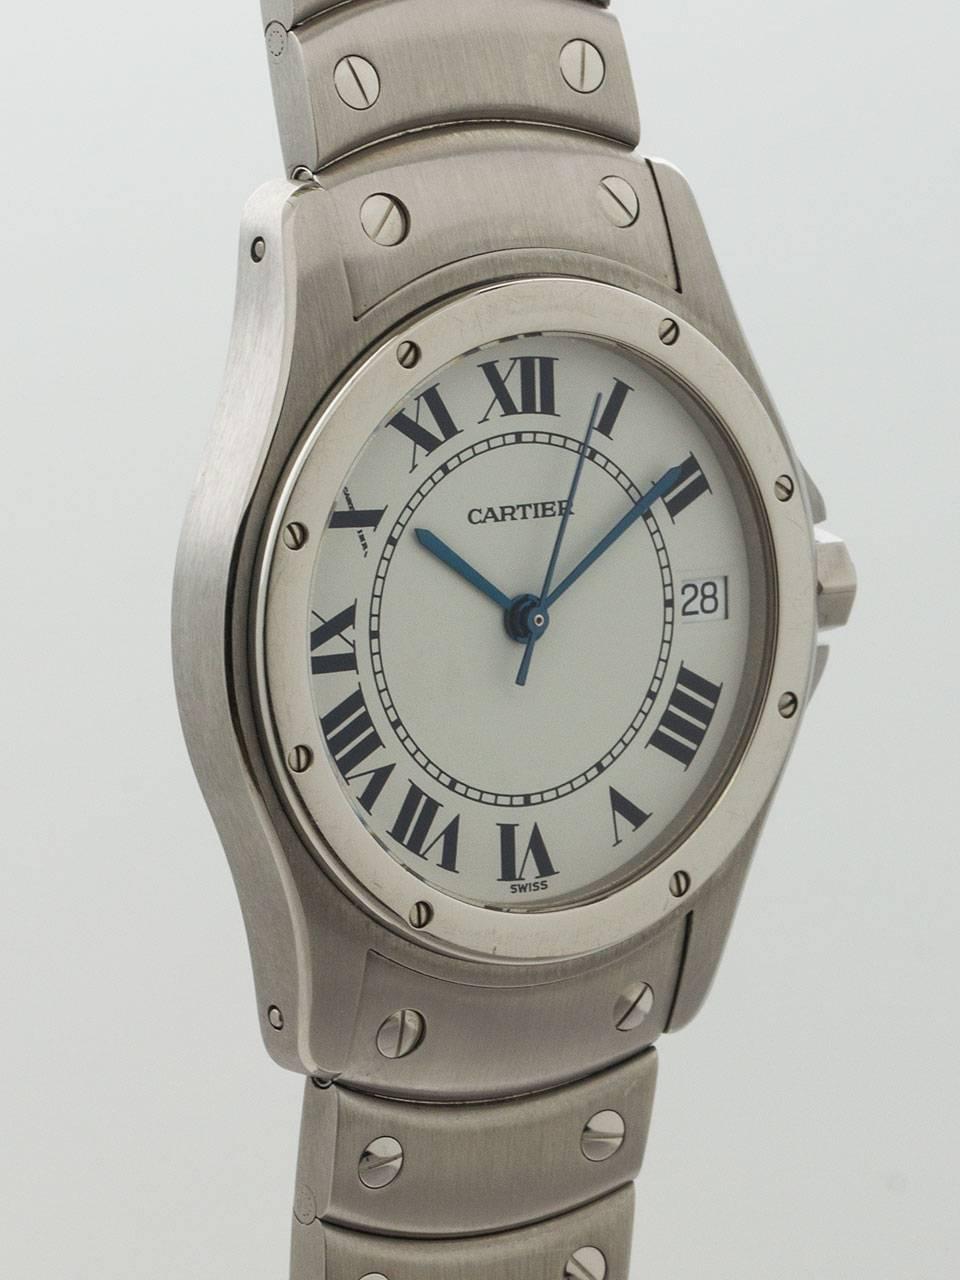 Cartier Stainless Steel Santos Ronde circa 2000s. Man’s model featuring 34mm diameter case and cabochon sapphire crown. Featuring classic white dial with Roman printed figures. Powered by self winding movement with sweep seconds and date. Stainless